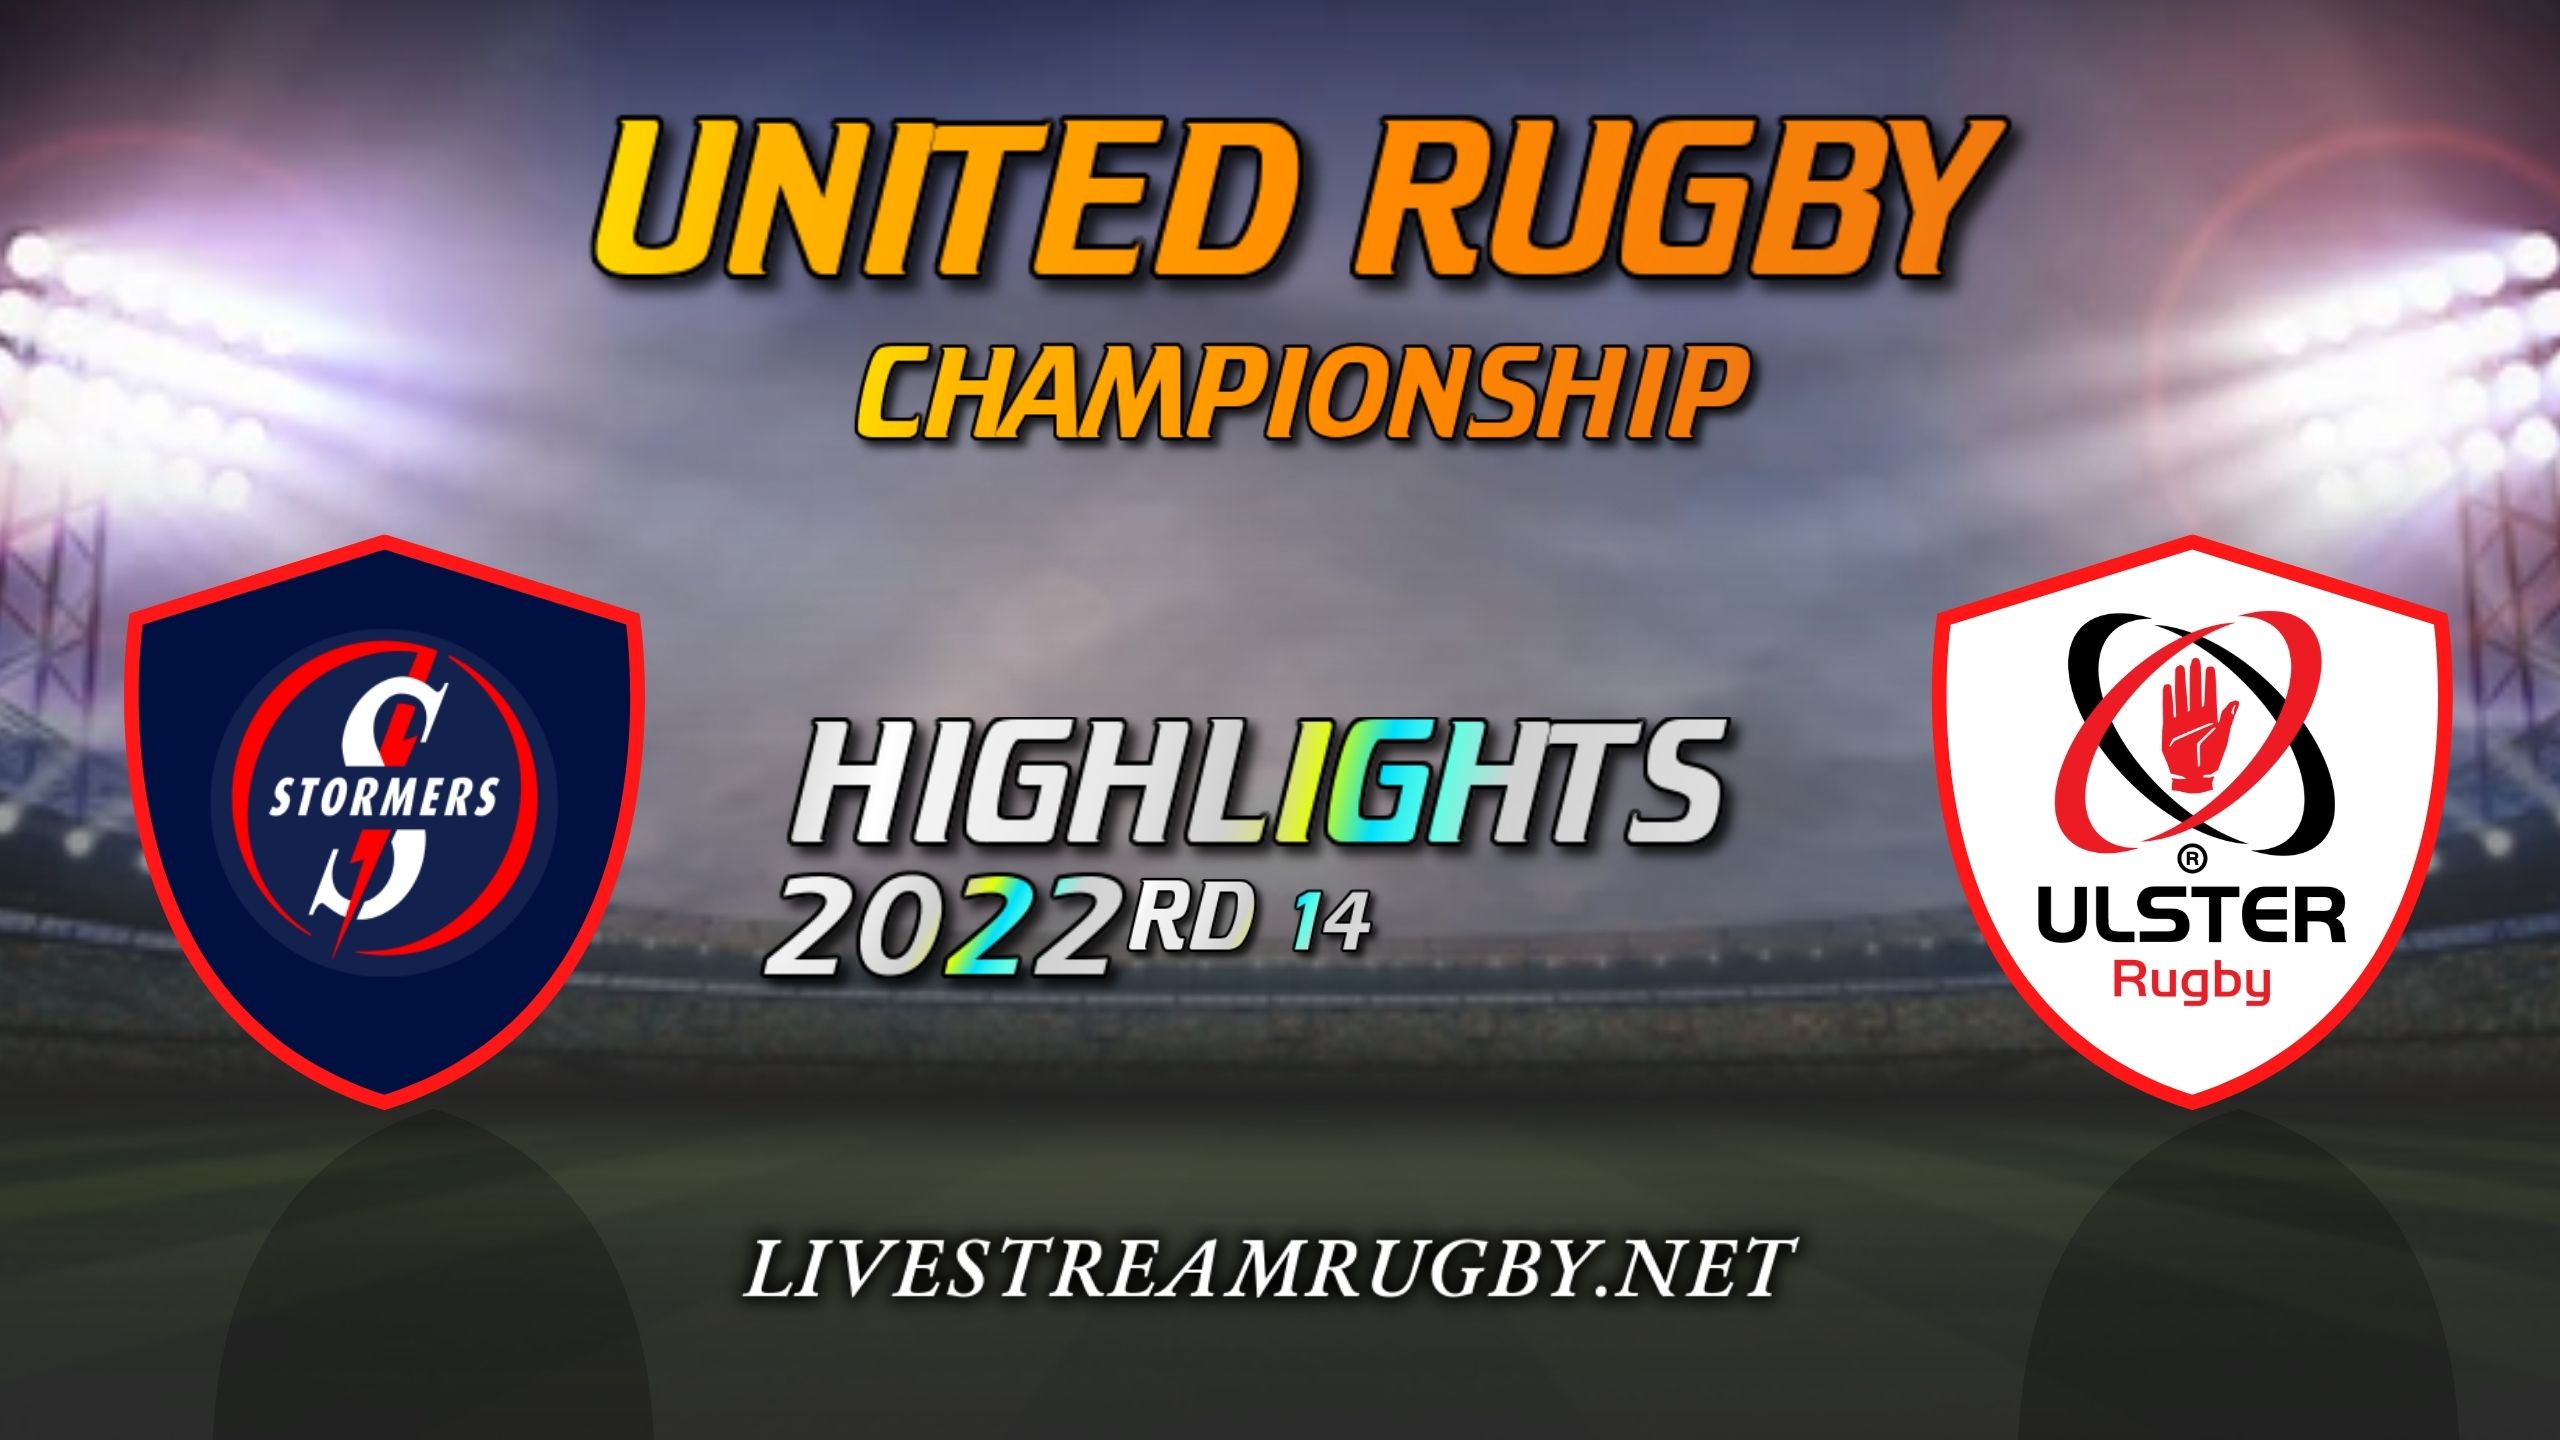 Stormers Vs Ulster Highlights 2022 Rd 14 United Rugby